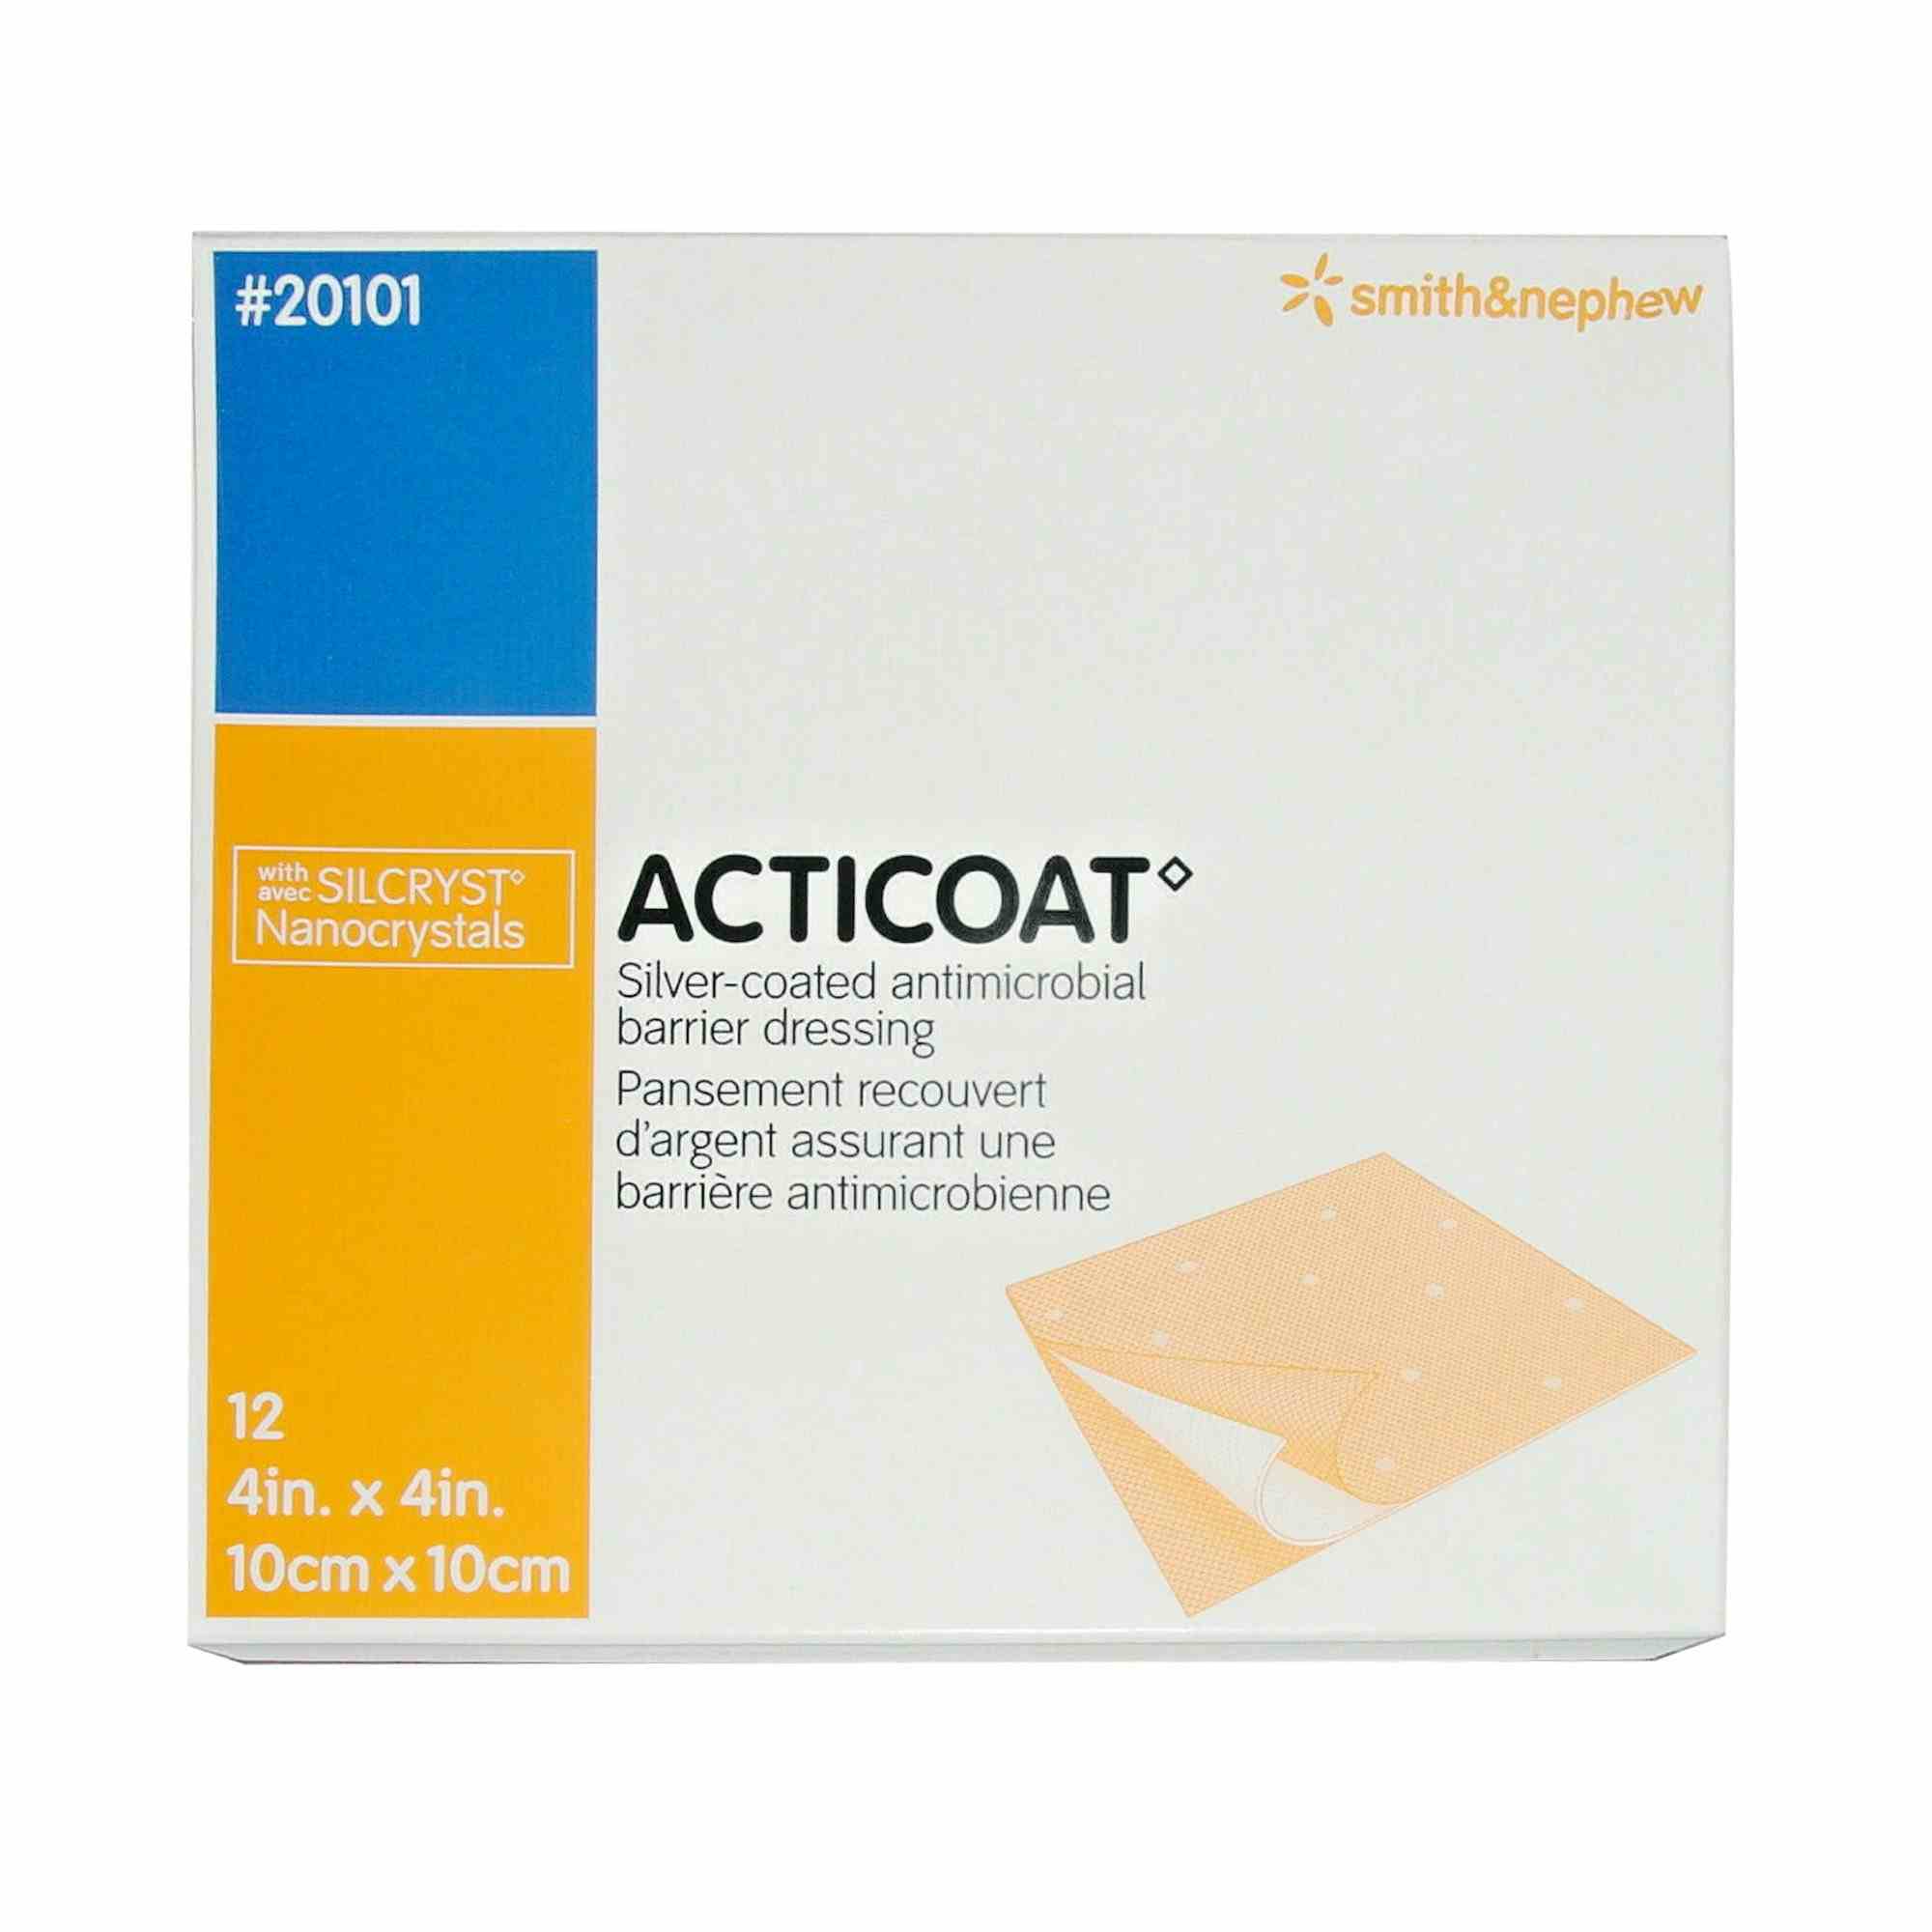 Acticoat Silver-coated Antimicrobial Barrier Dressing, 4 X 4", 20101, Pack of 12